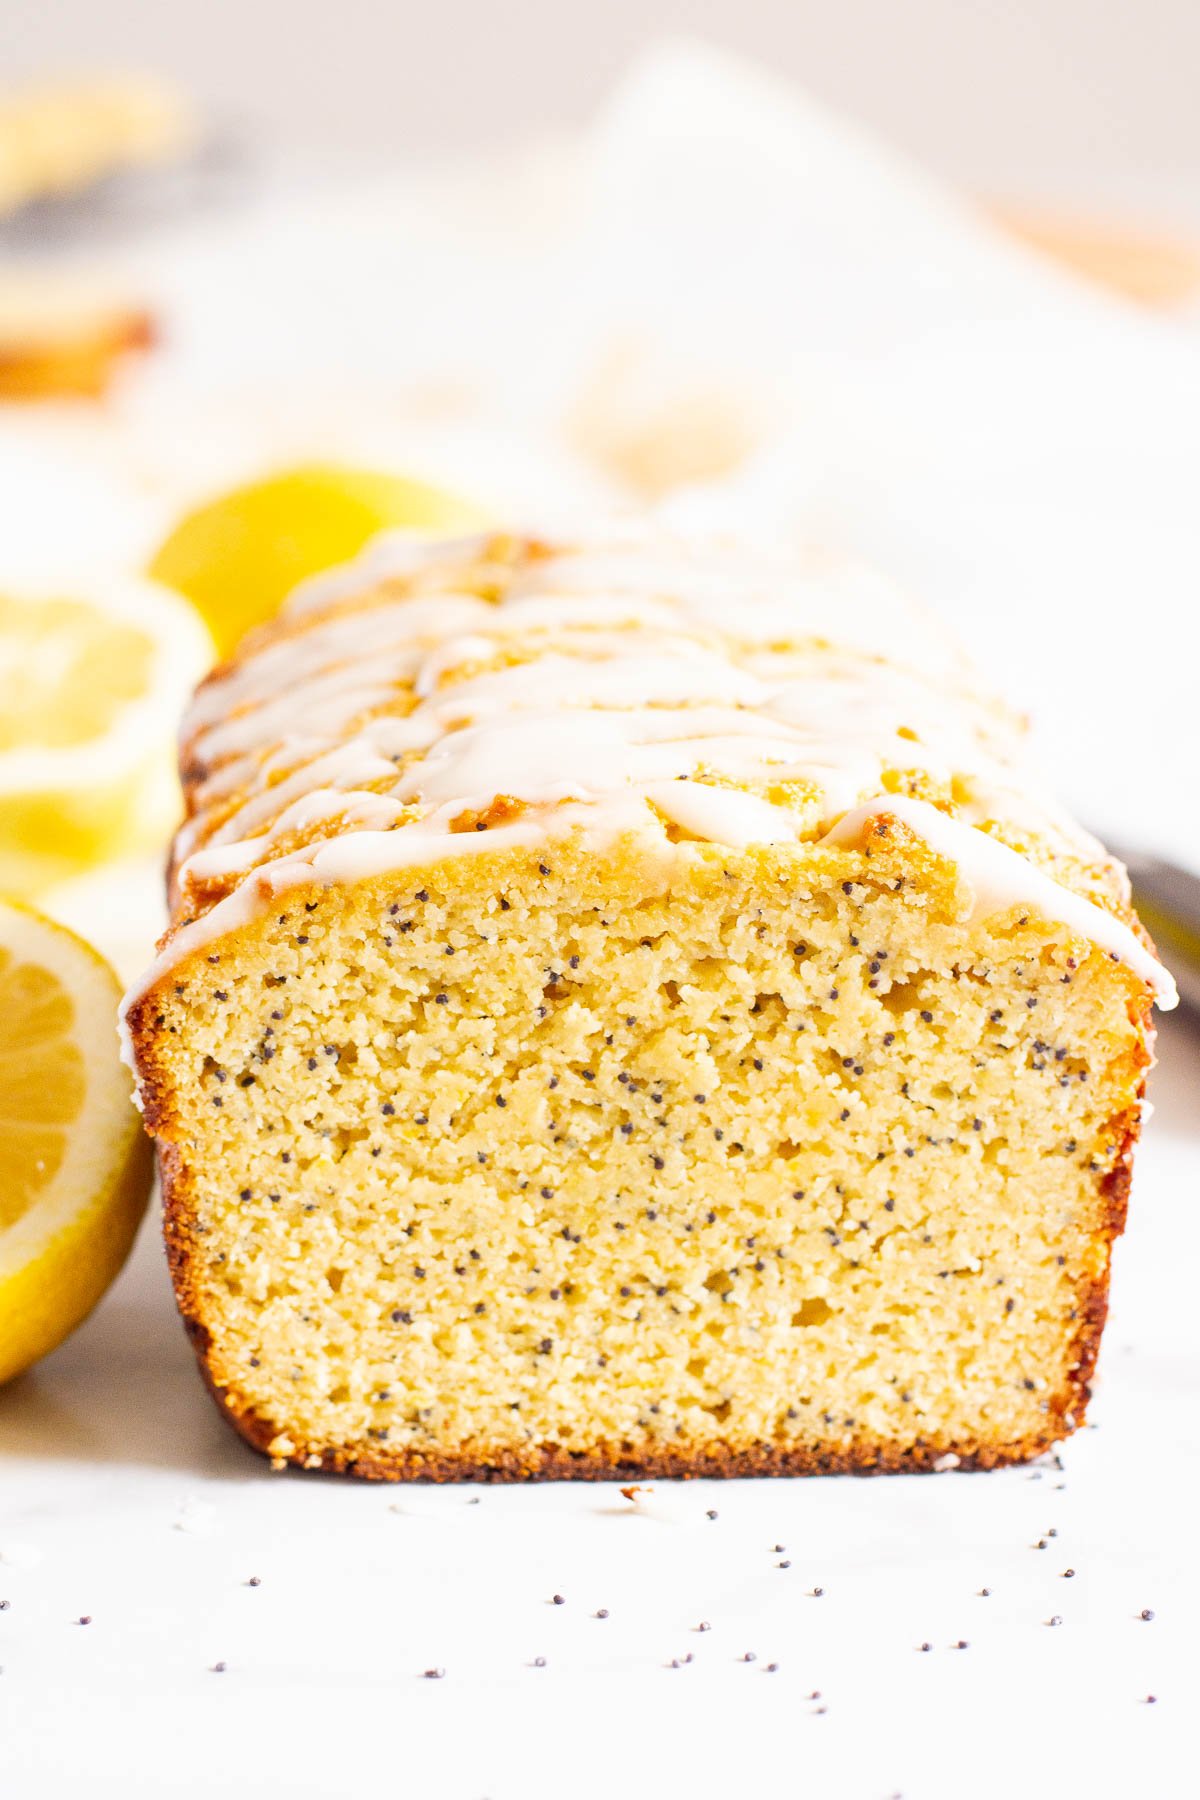 Loaf of healthy lemon poppy seed bread with glaze that has been sliced.